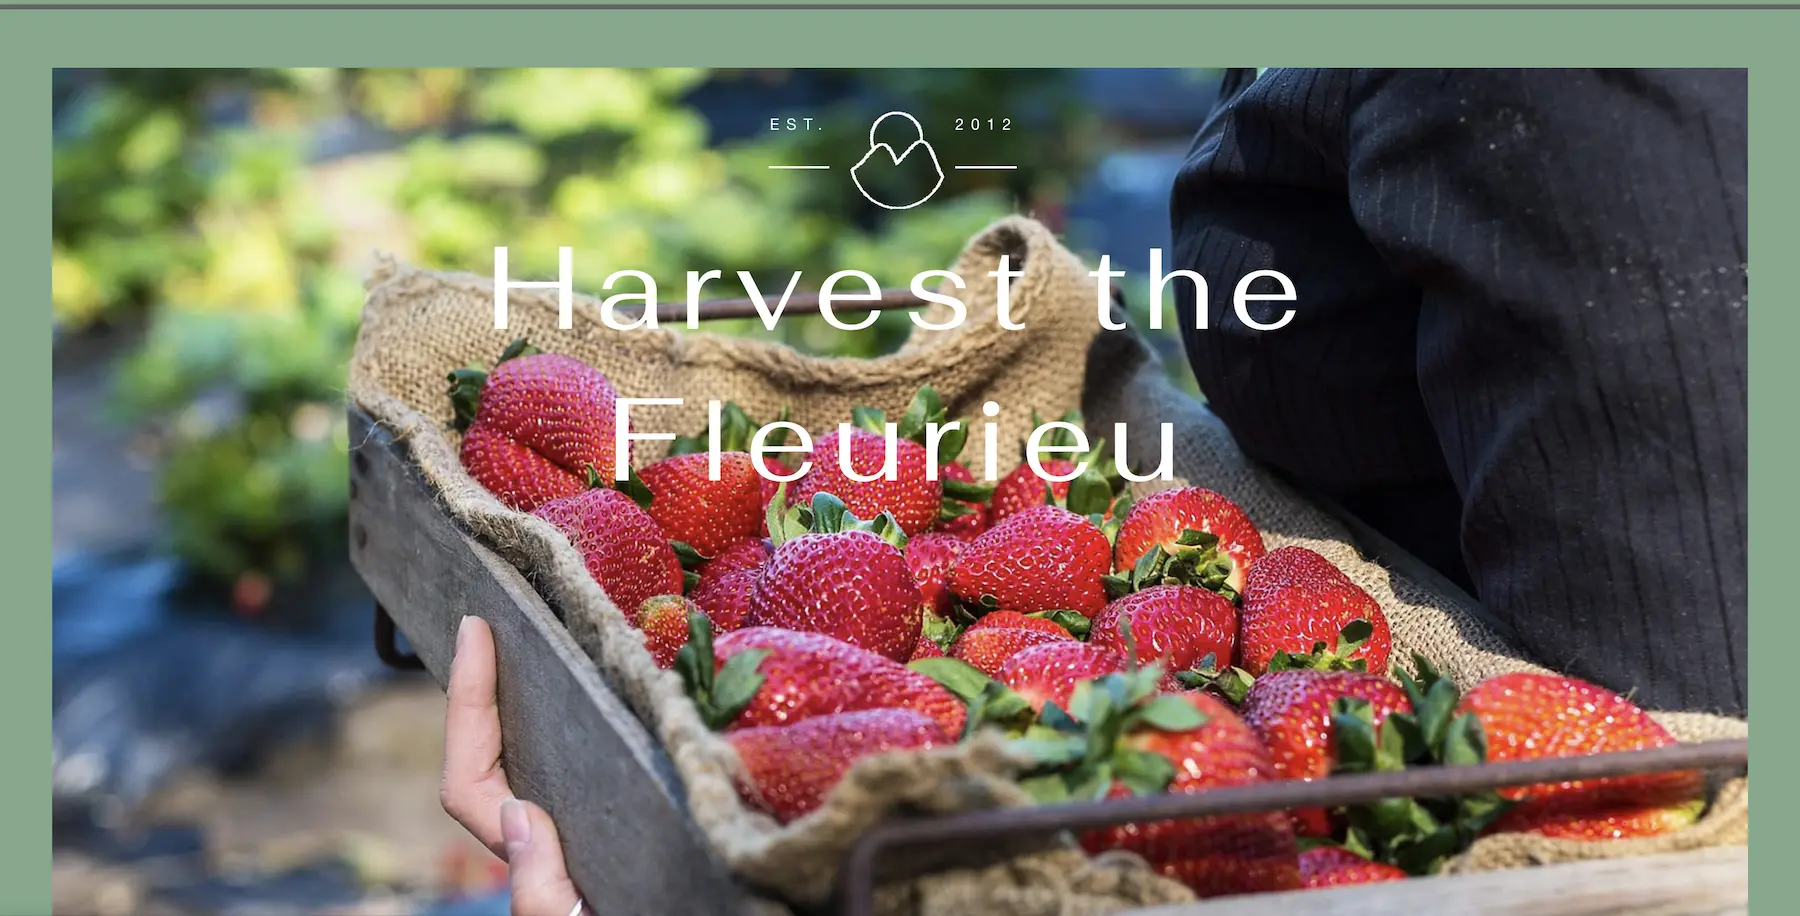 The website hero from the original Harvest the Fleurieu website created by Allis with Wix.